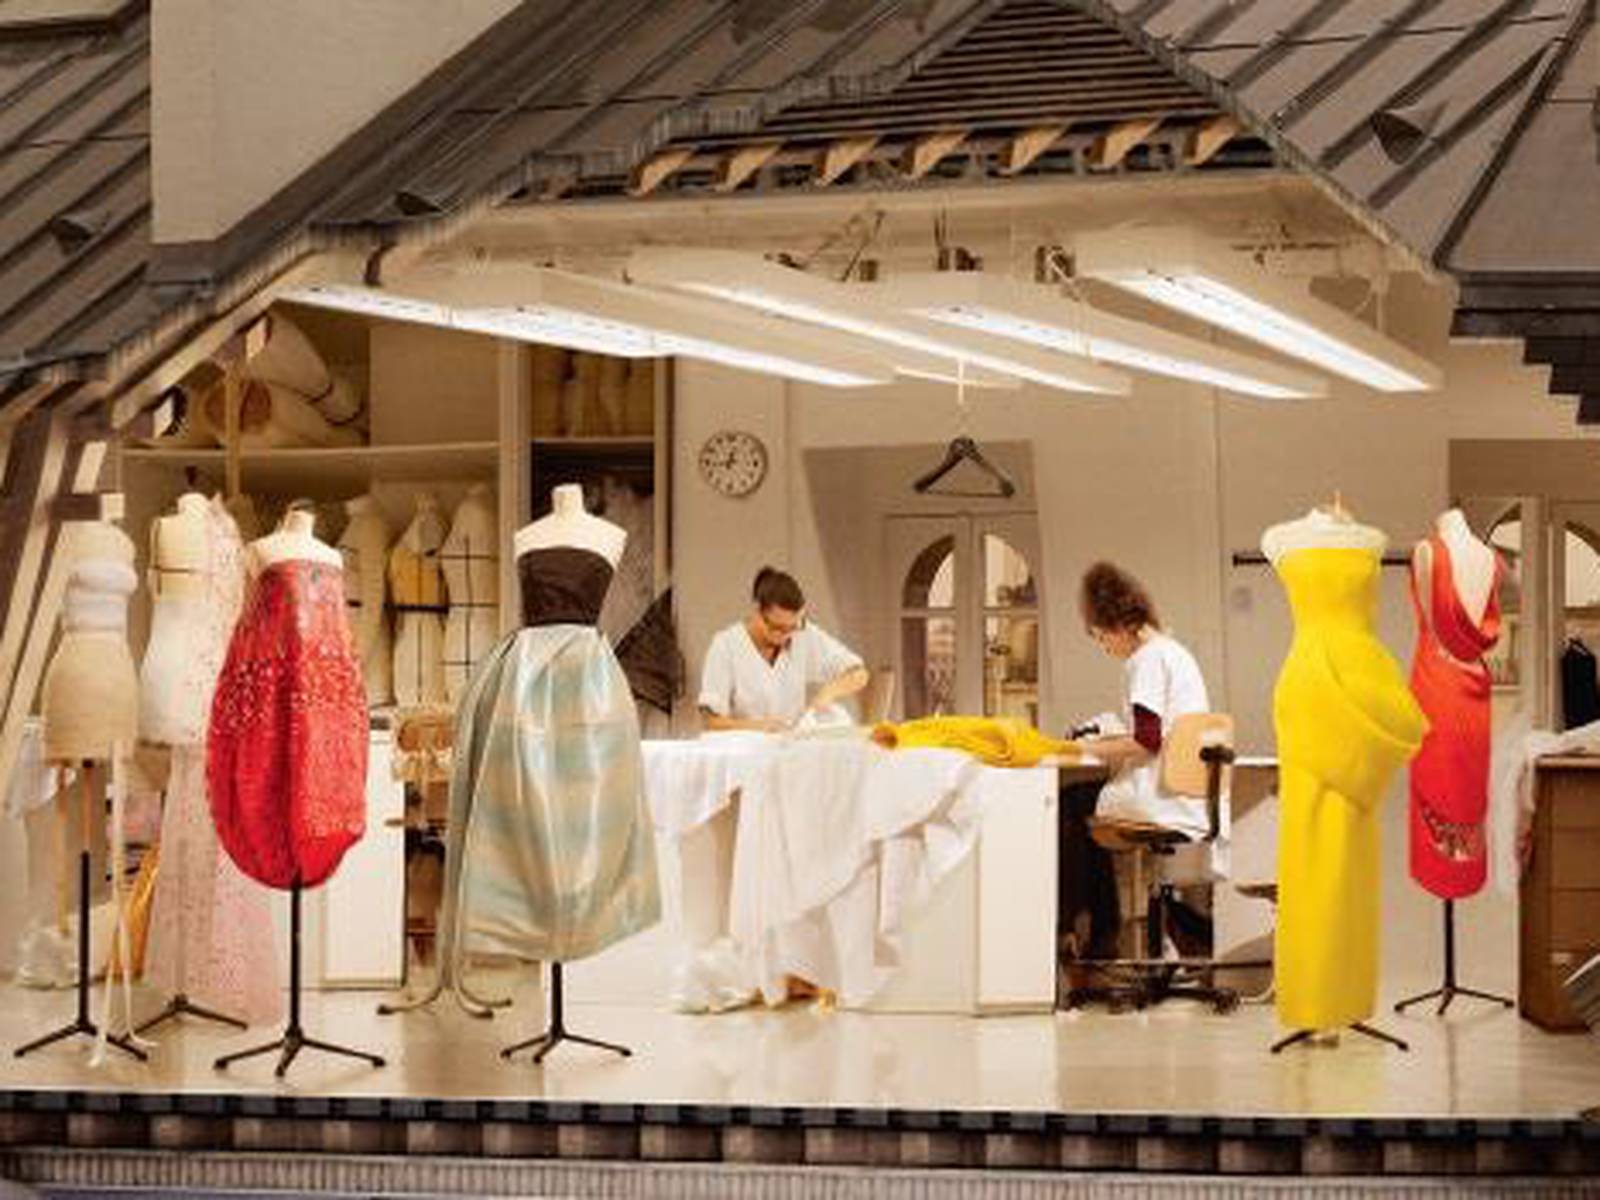 Christian Dior Couture: Powered by Creativity